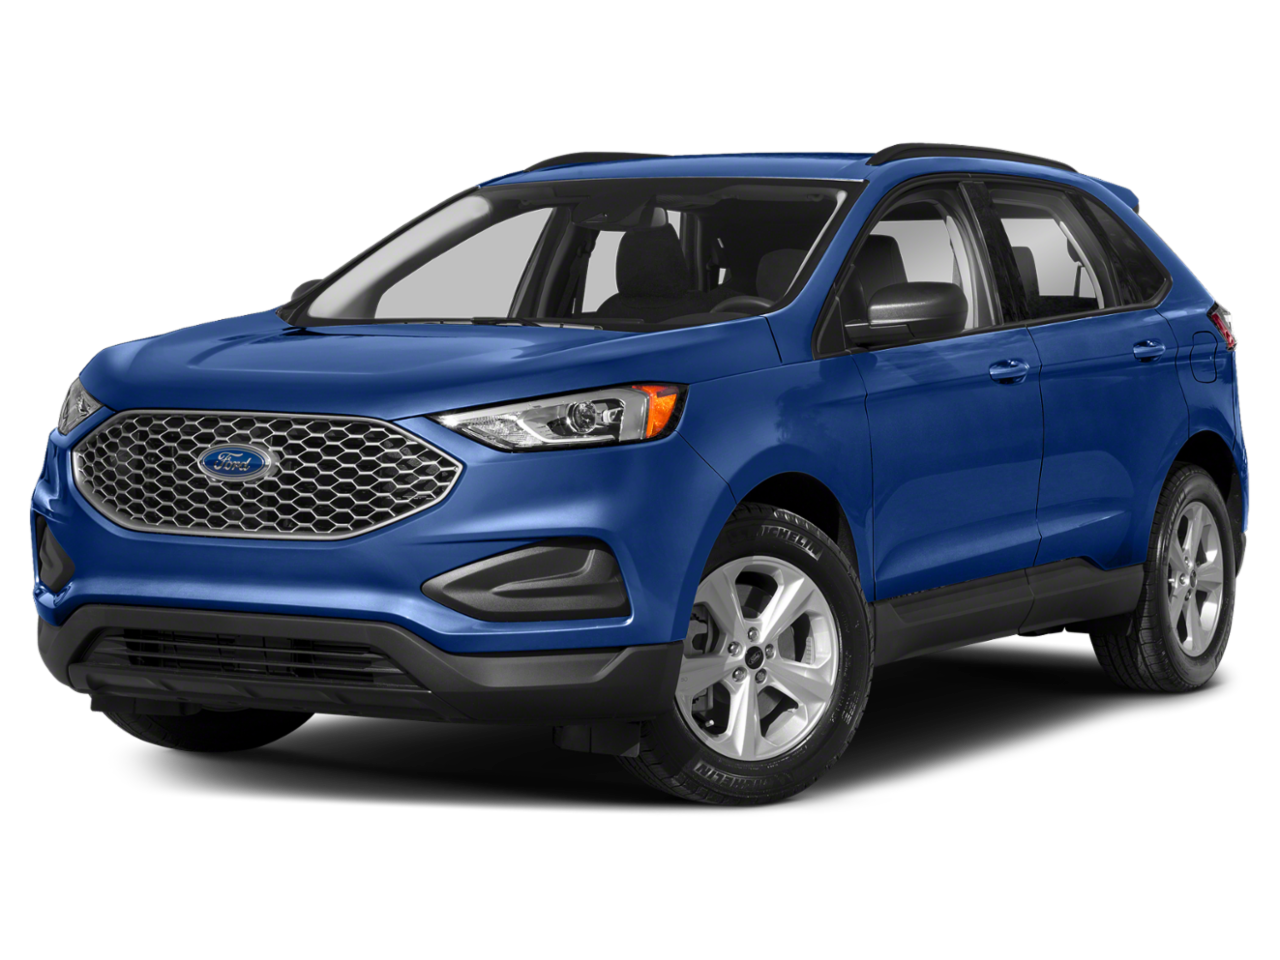 K&S Ford is a Fairbury Ford dealer and a new car and used car Fairbury